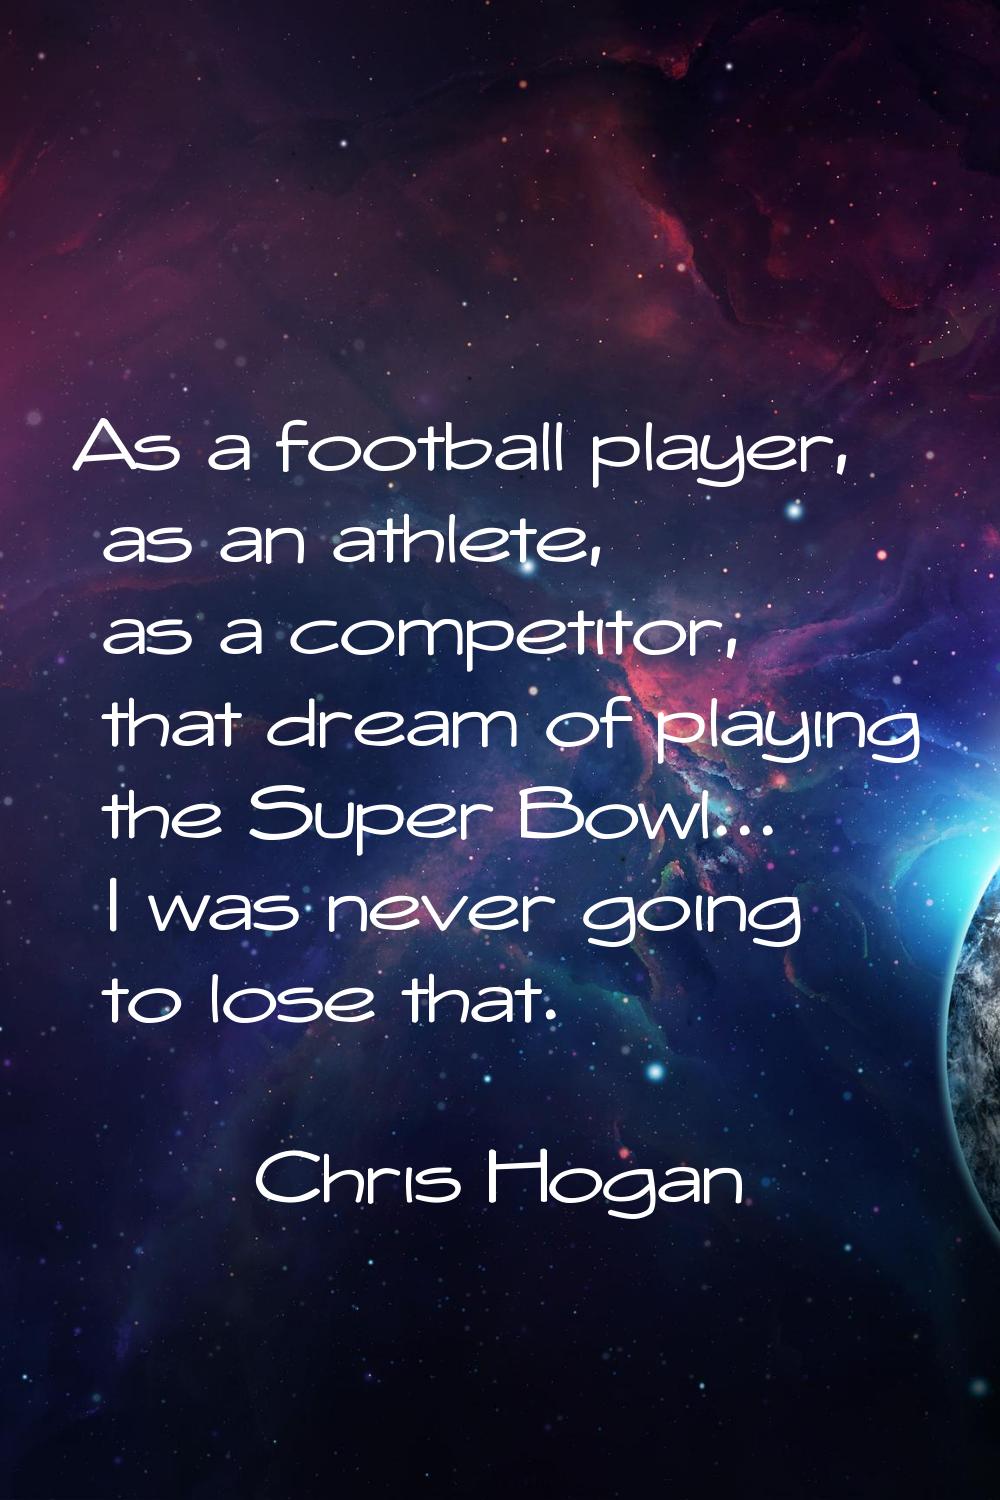 As a football player, as an athlete, as a competitor, that dream of playing the Super Bowl... I was